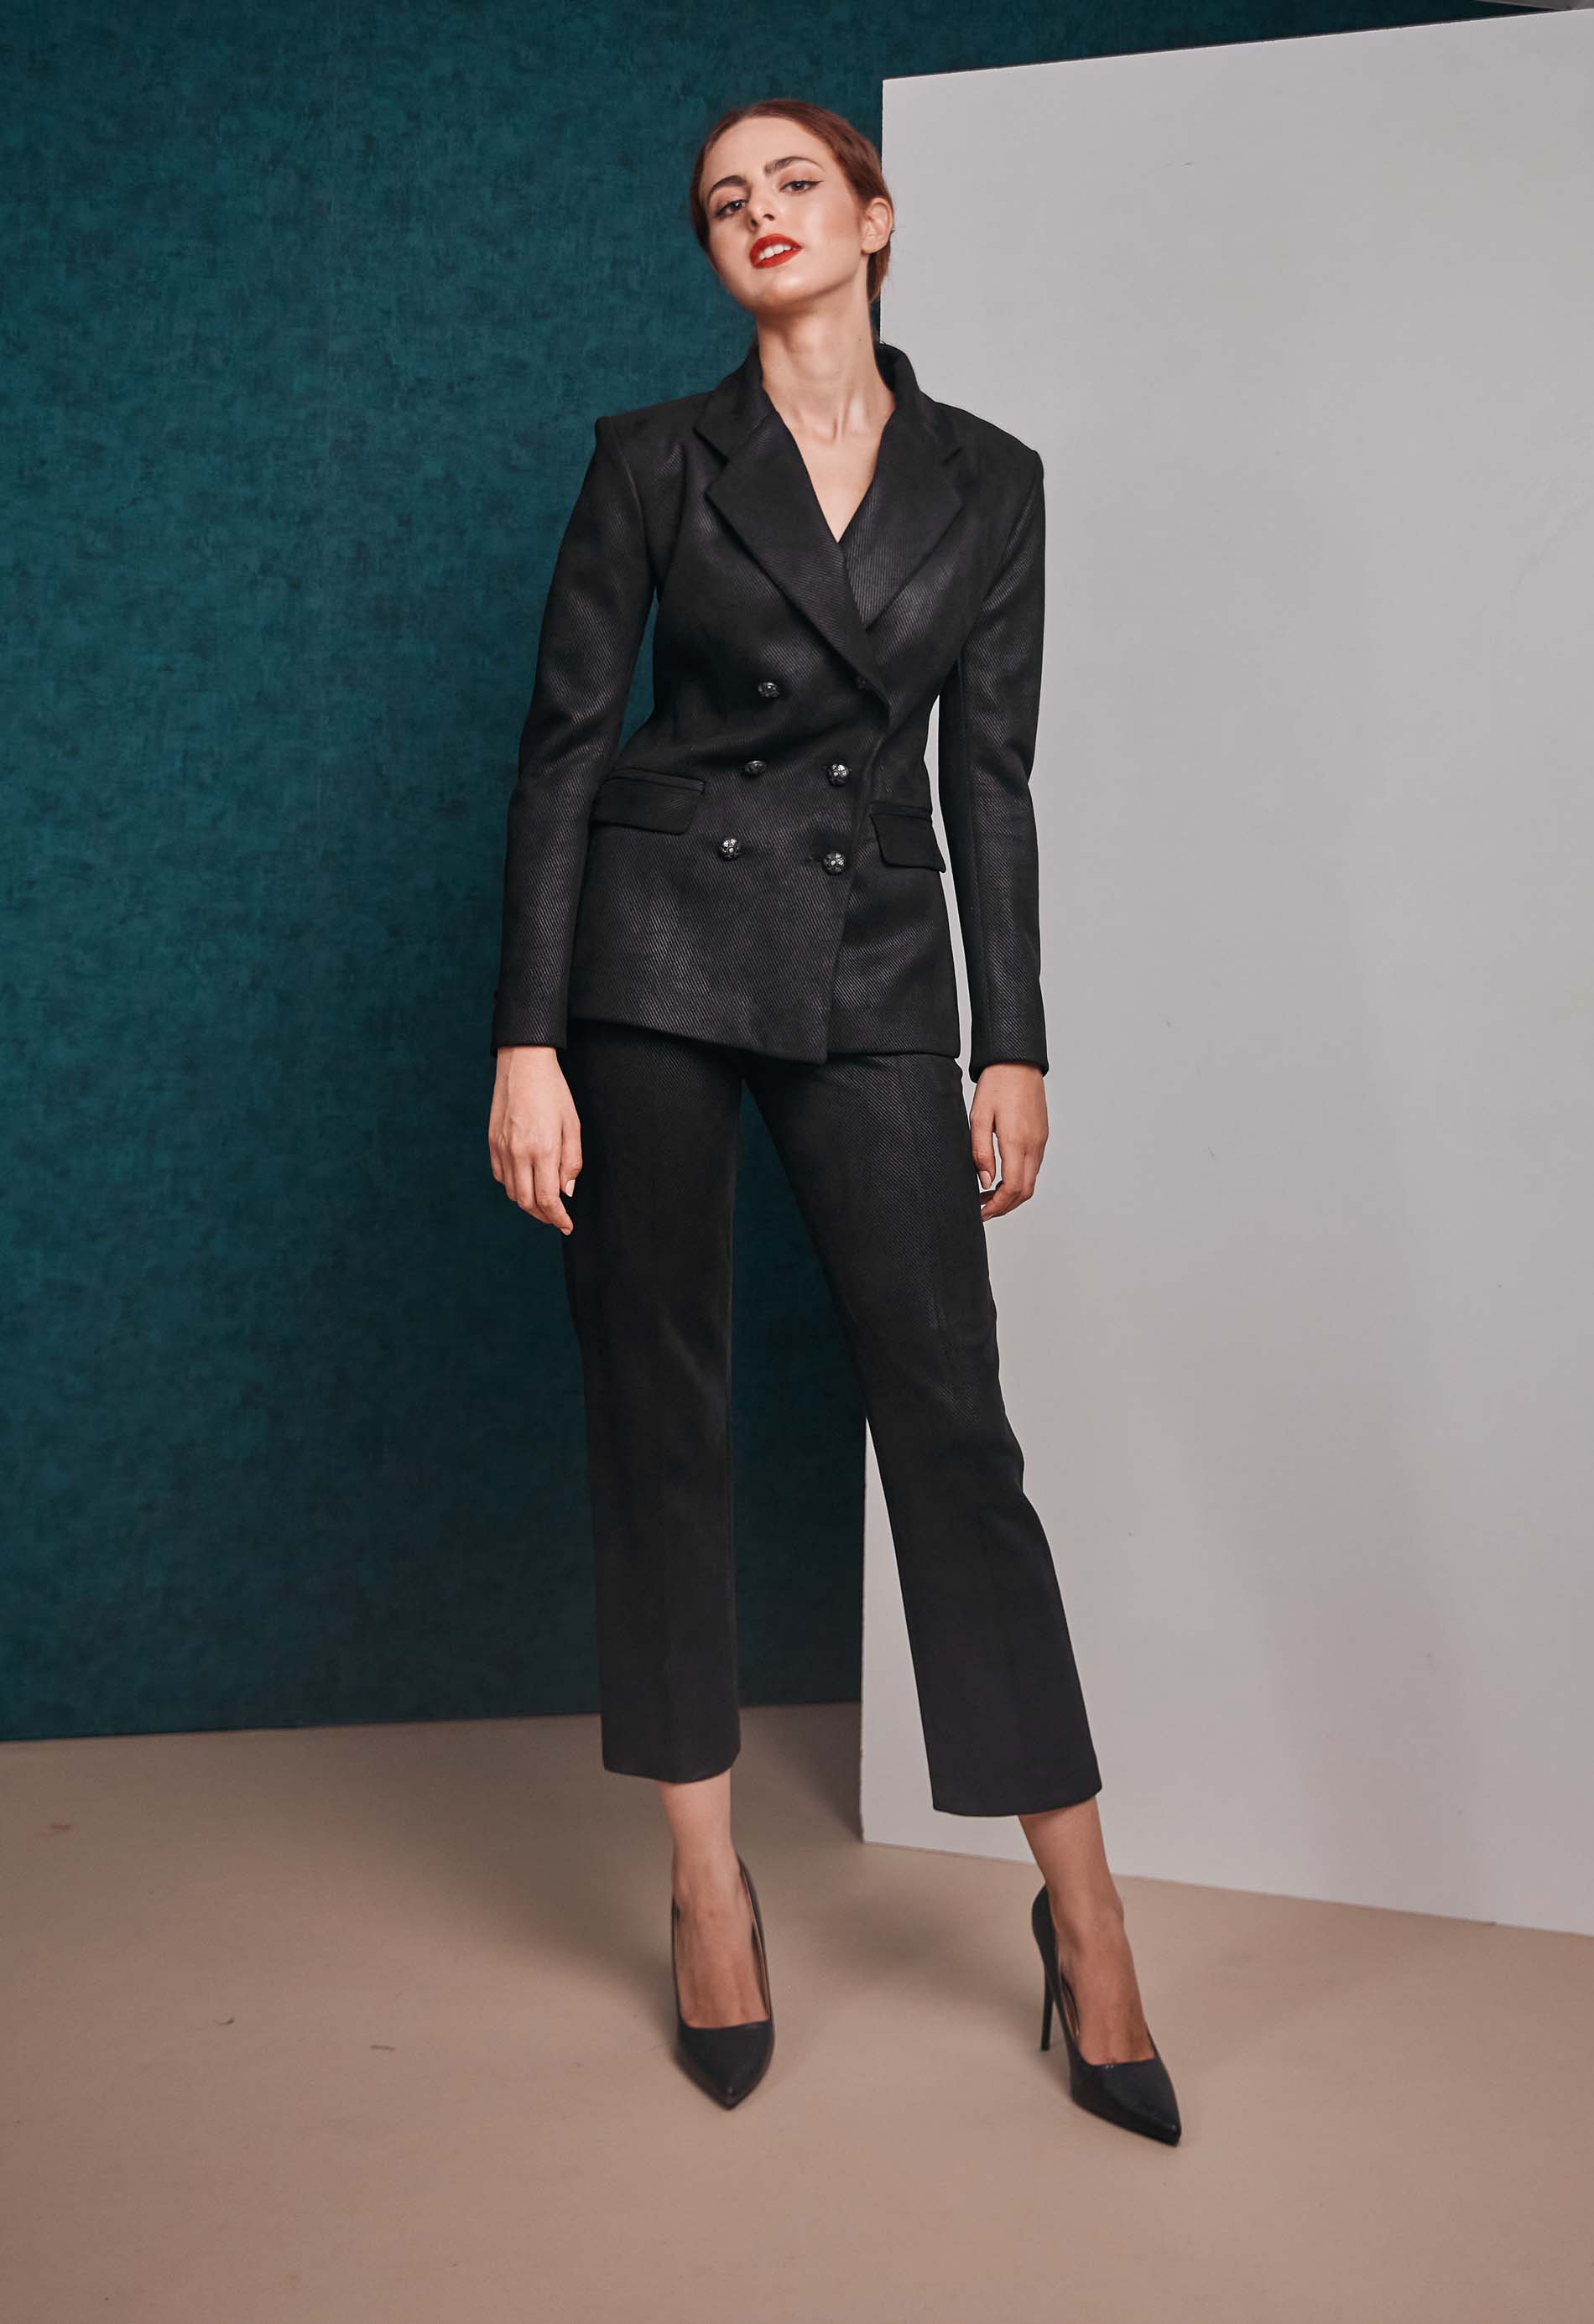 Coated double breasted blazer and black pant look